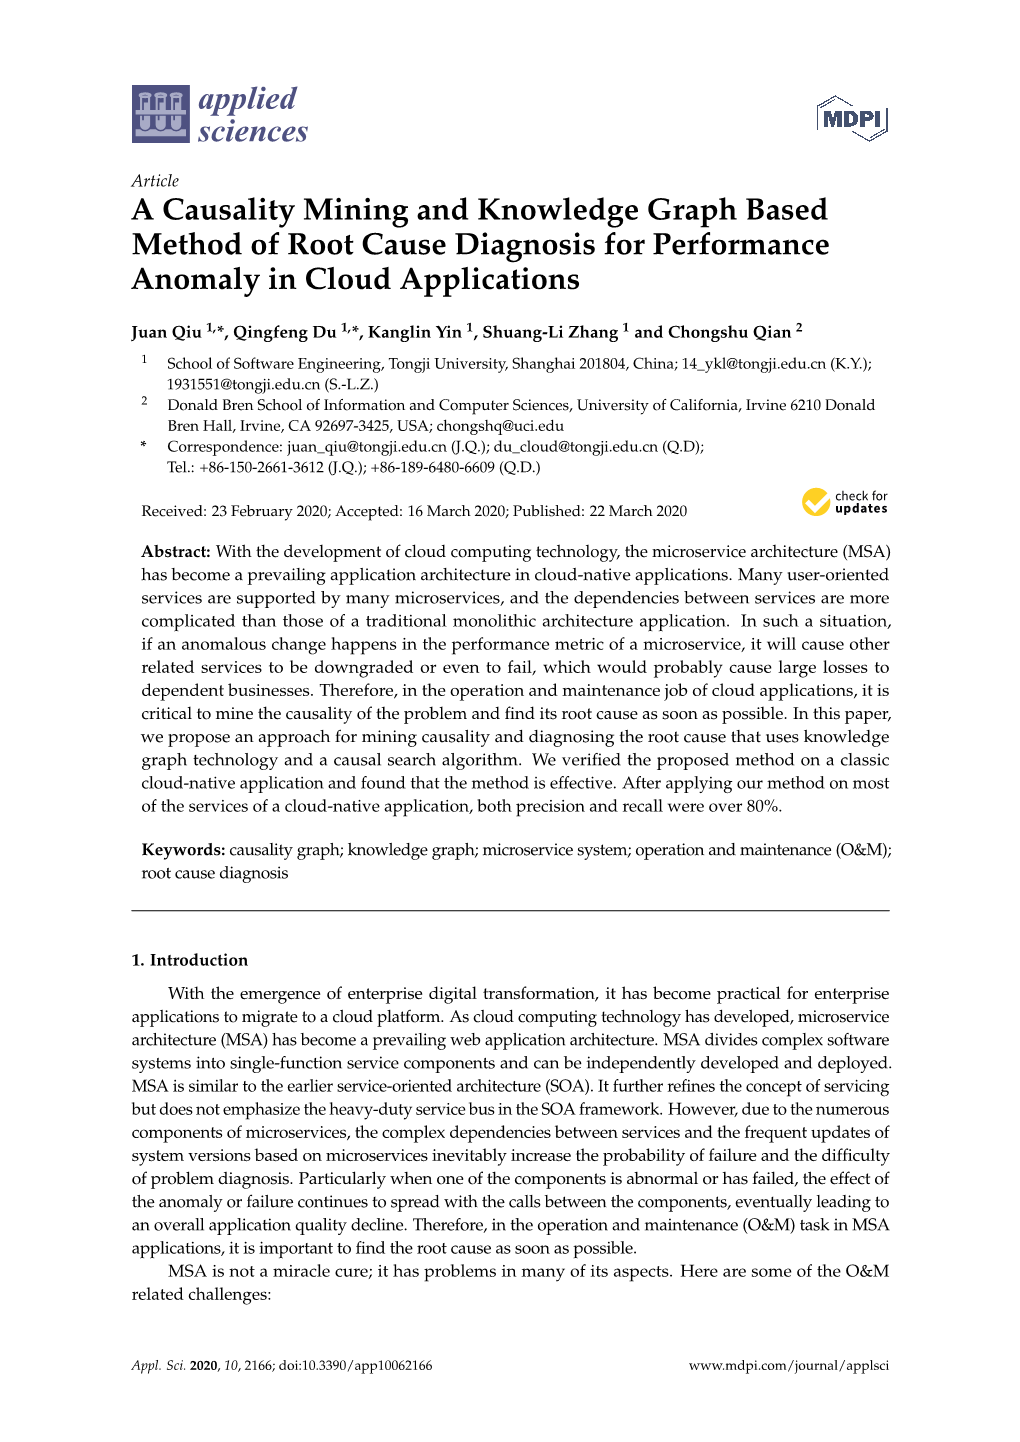 A Causality Mining and Knowledge Graph Based Method of Root Cause Diagnosis for Performance Anomaly in Cloud Applications